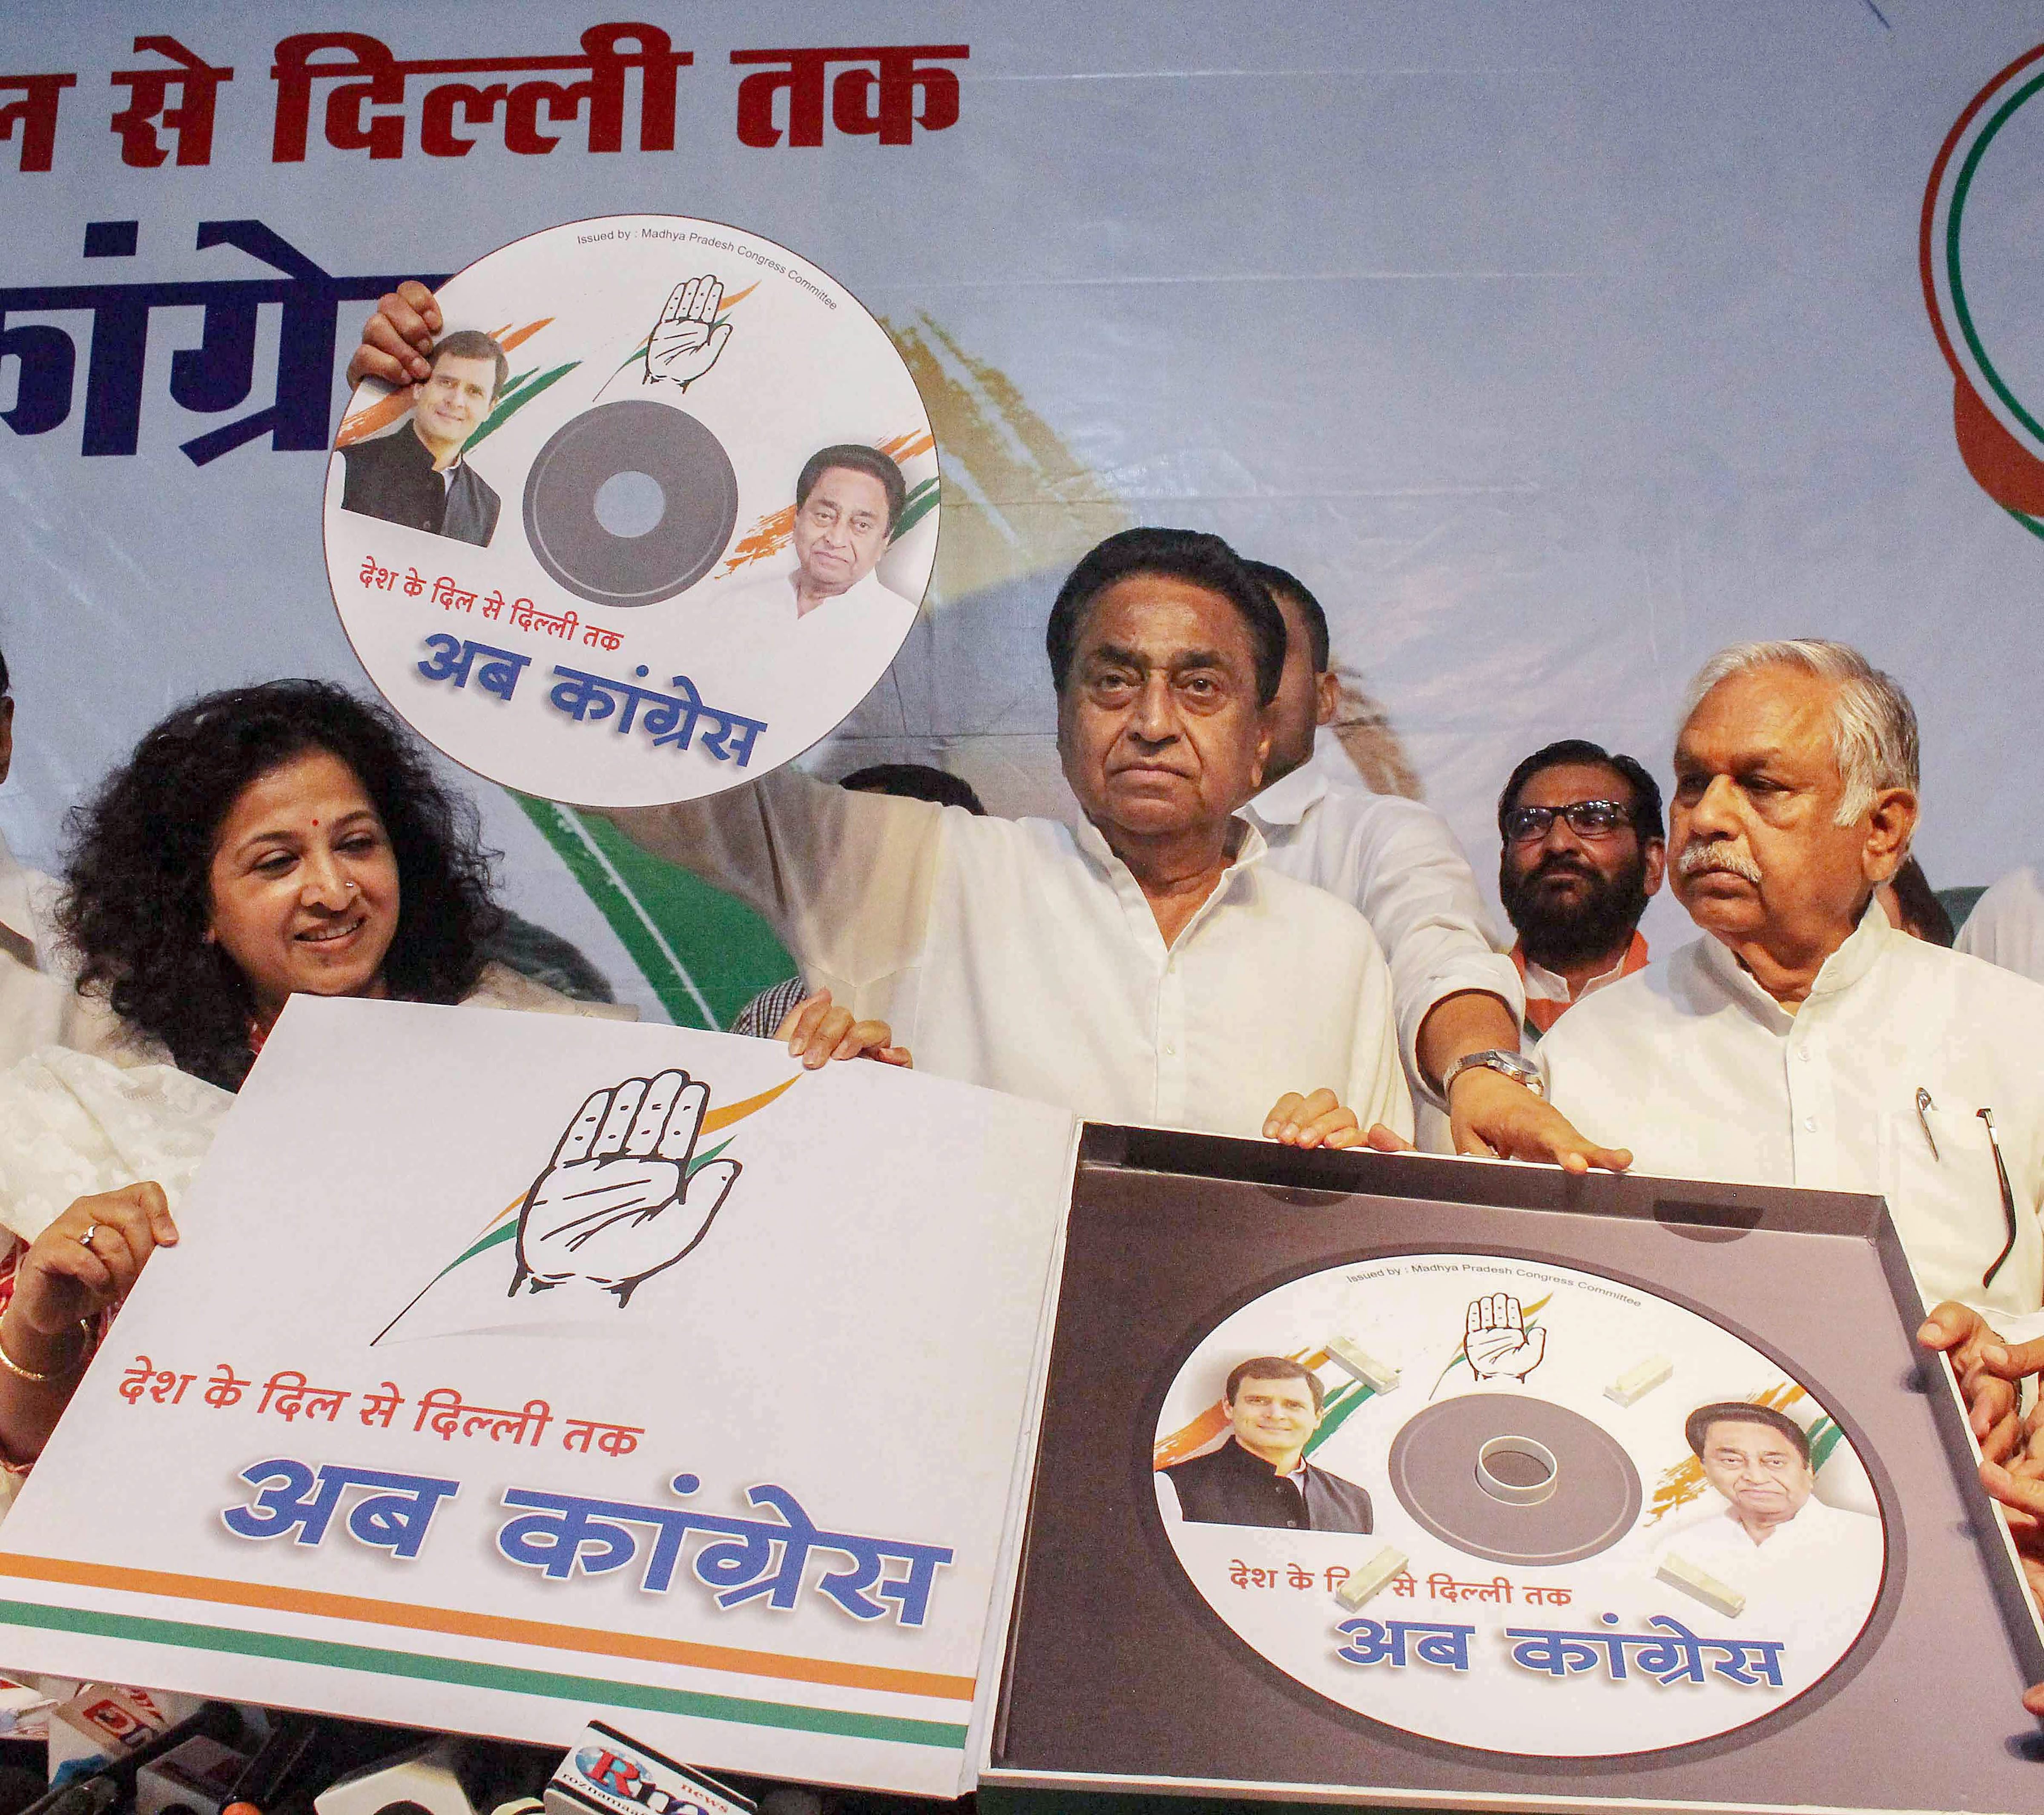 Madhya Pradesh chief minister Kamal Nath releases a DVD of the Congress party's theme songs in Bhopal for the upcoming Lok Sabha elections on Wednesday, April 3, 2019